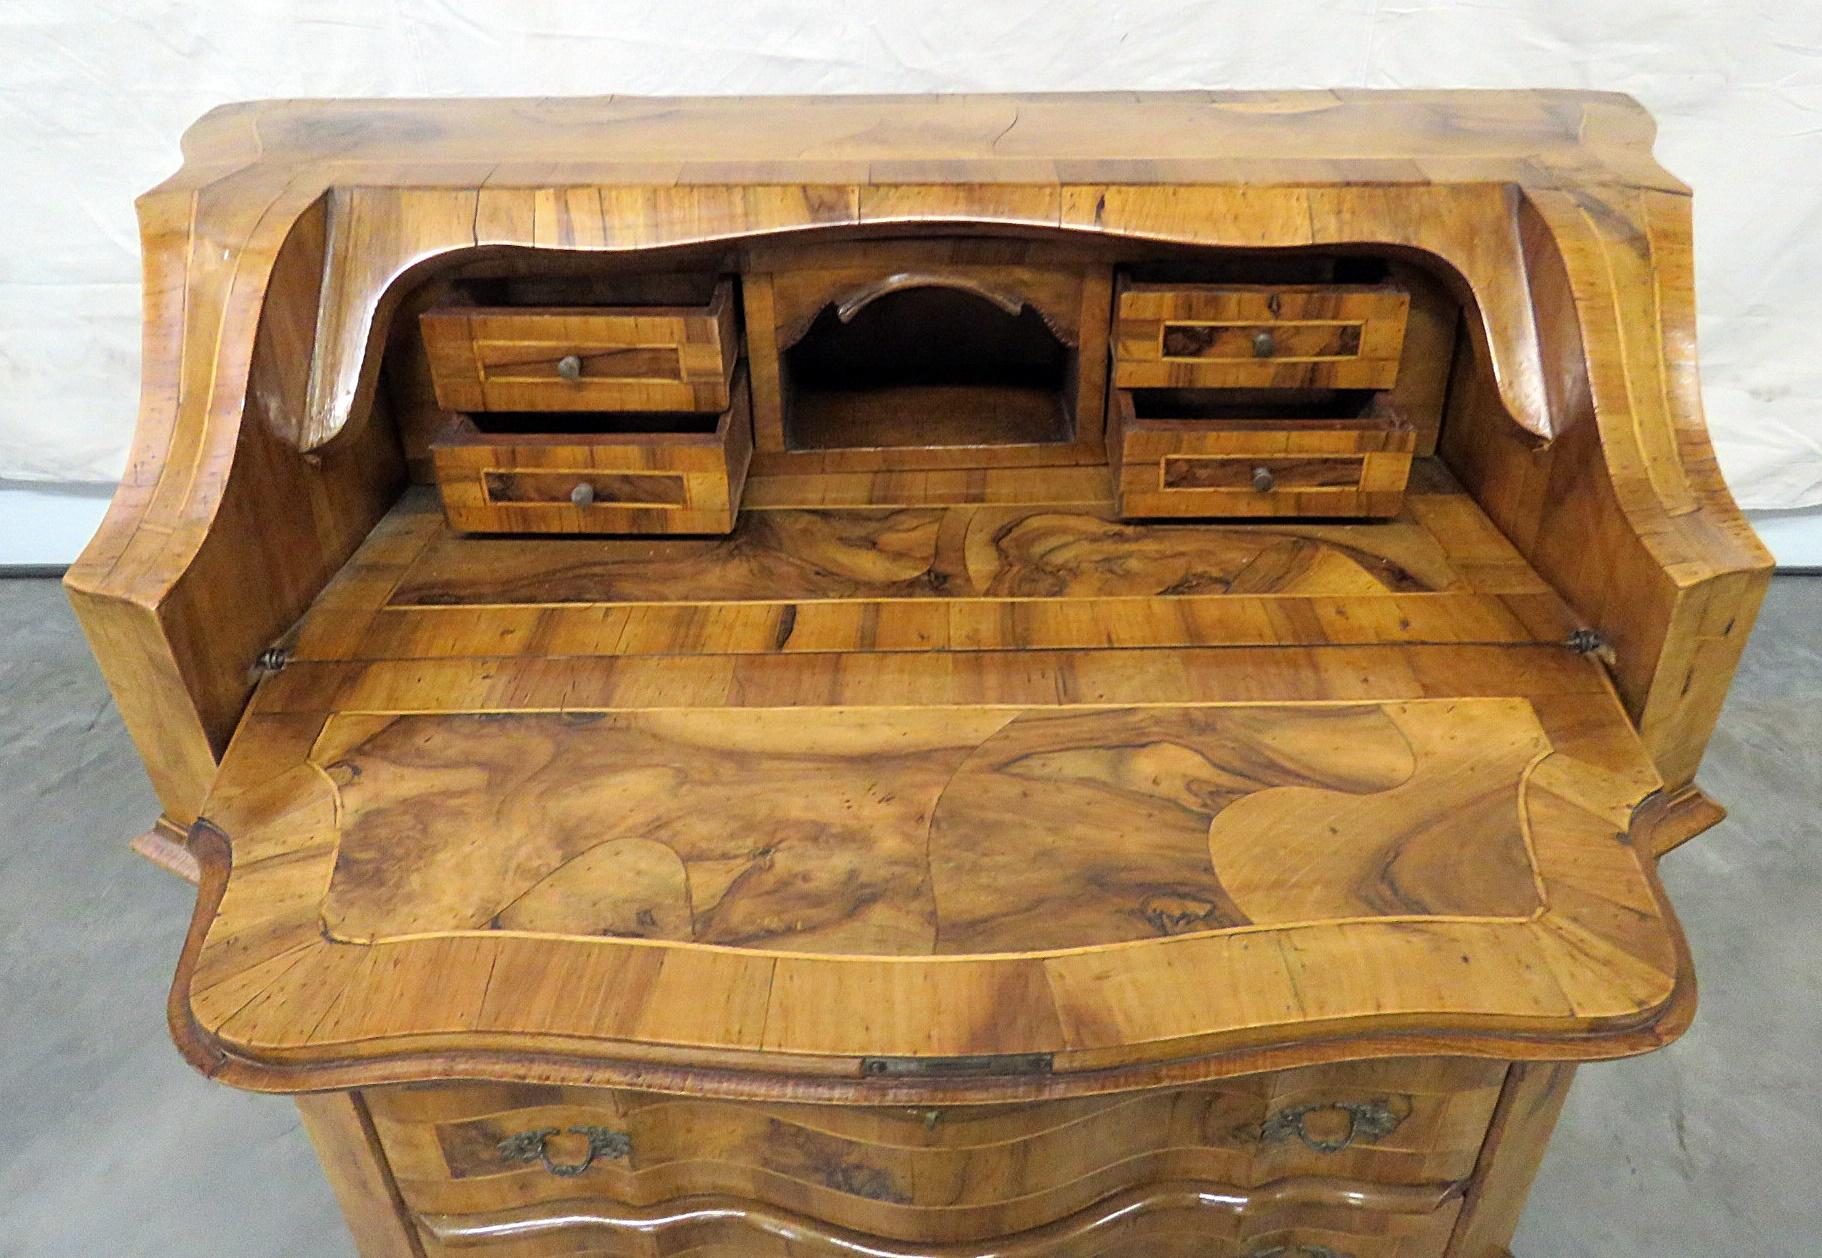 Vintage olivewood secretary desk with a drop down desk containing 4 drawers over 3 drawers. The desk is 24